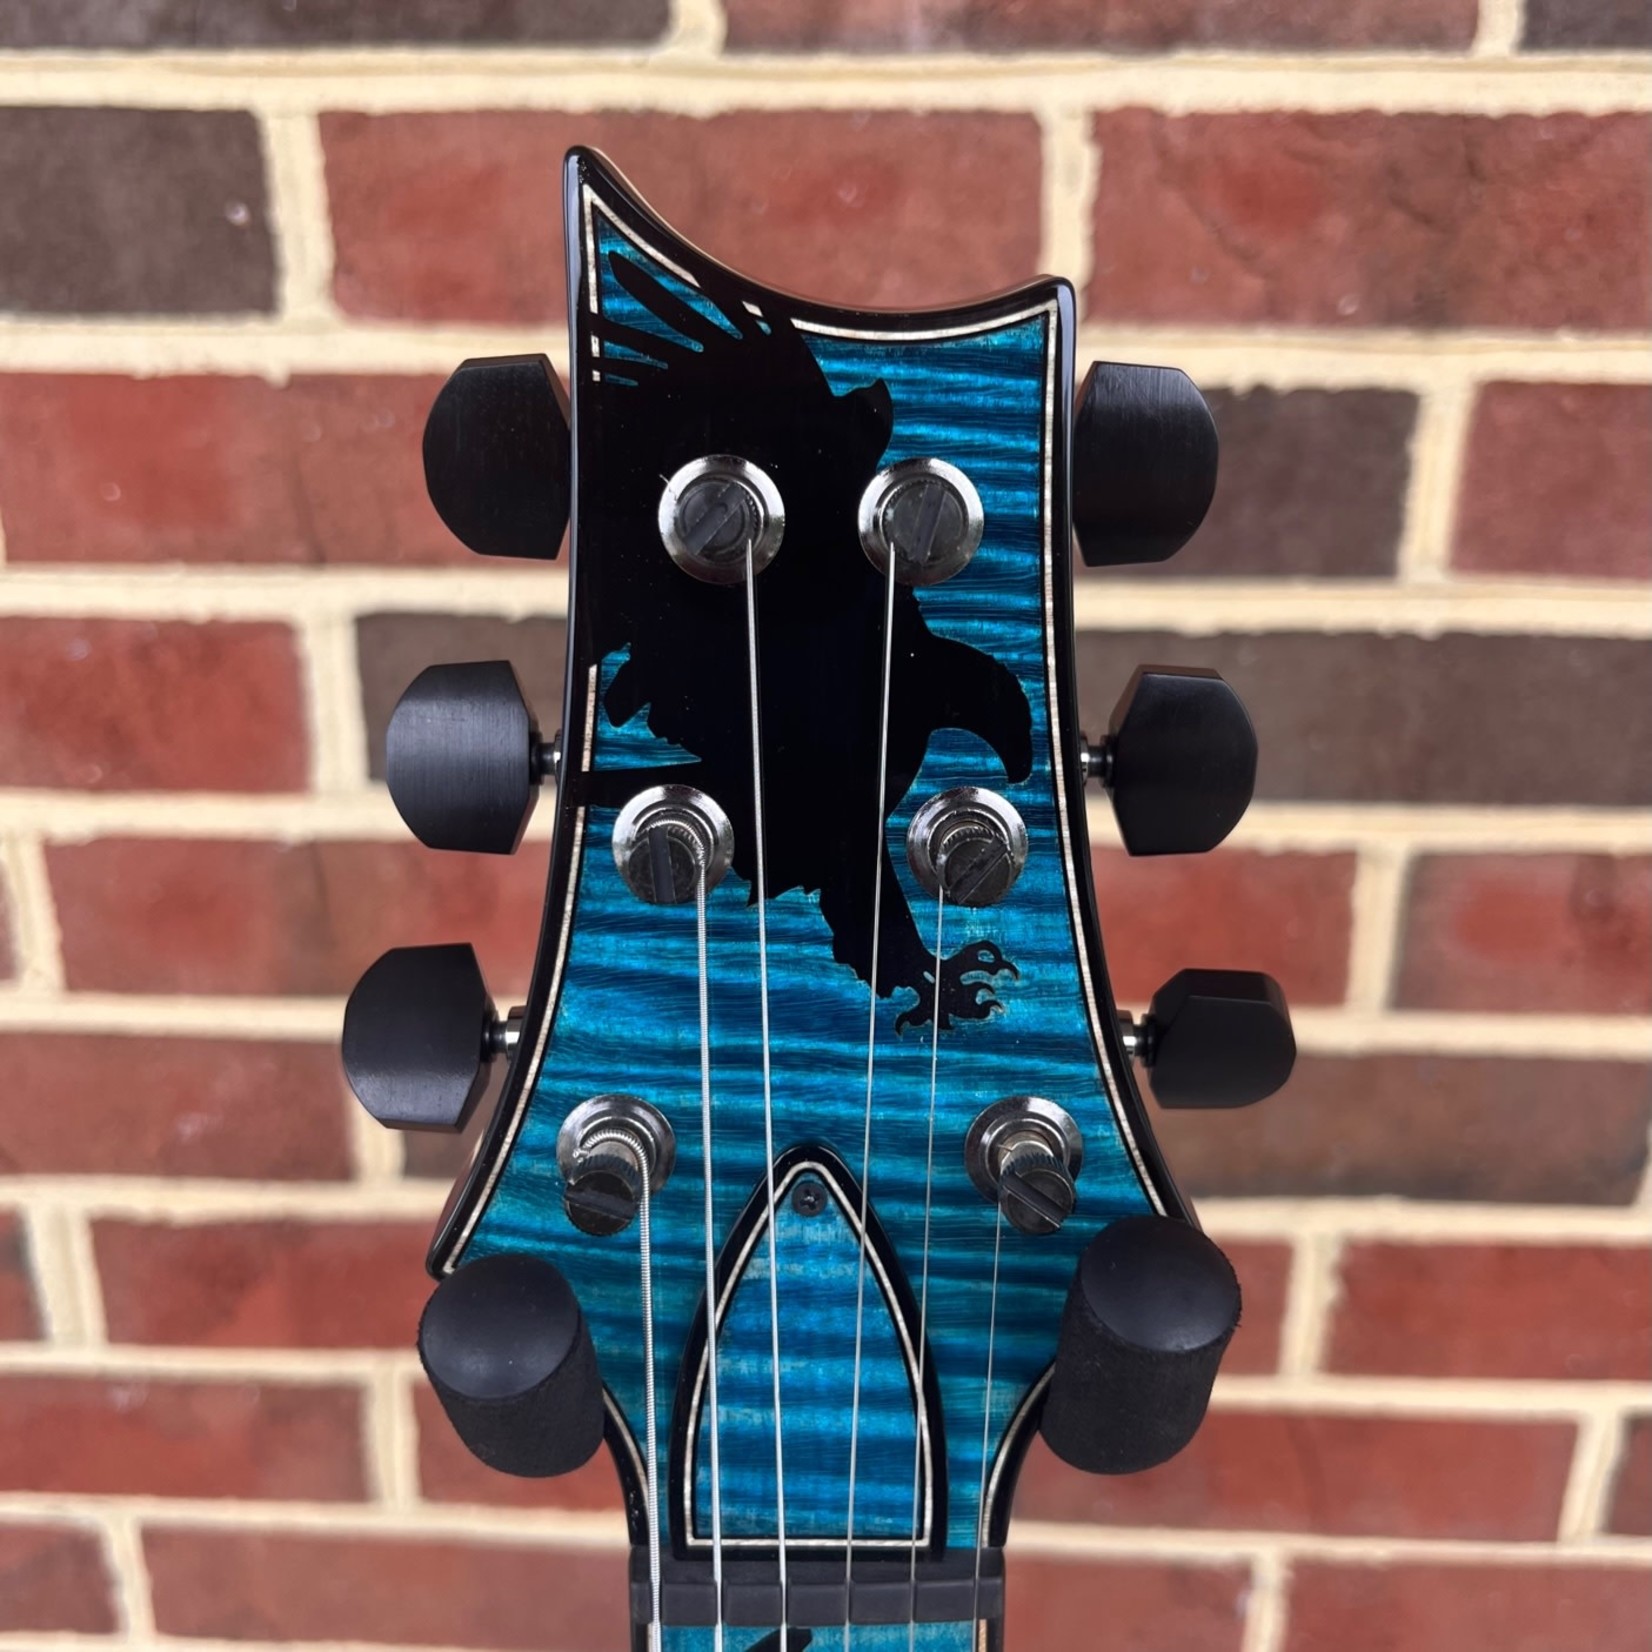 Paul Reed Smith Paul Reed Smith Private Stock McCarty 594, PS# 9741, Sub Zero Dragon's Breath, East Coast Flamed Maple Top, Black Limba Body, Curly Maple Neck, Birds of a Feather Inlay (ebony/maple), Matching Back Plates, Smoked Black Hardware, Hardshell Case